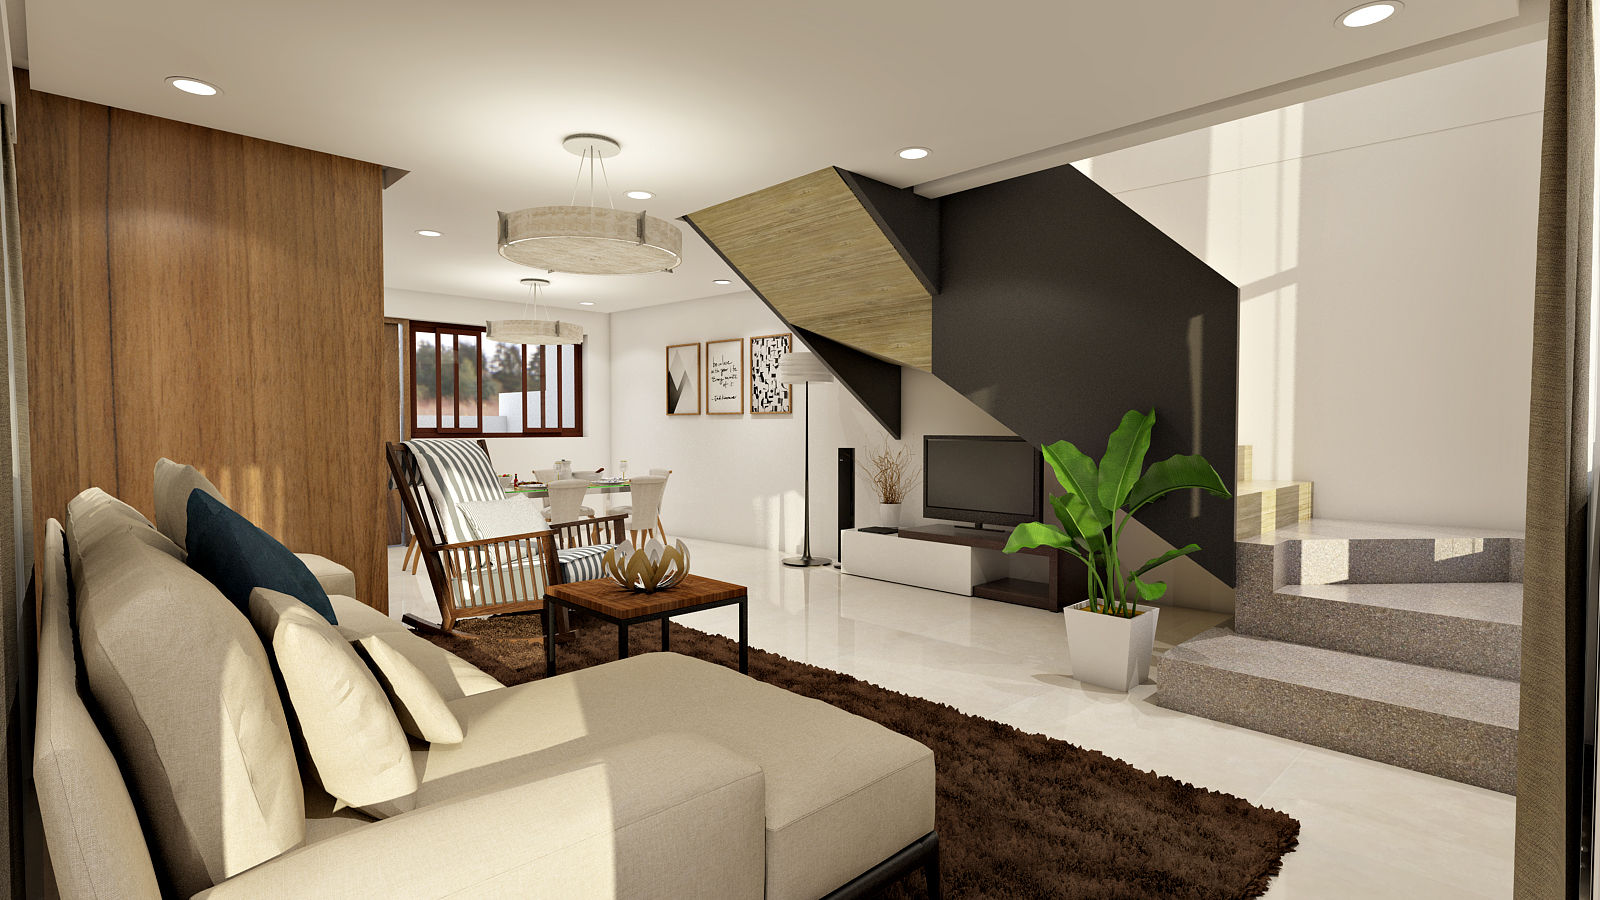 Brand new 2 storey house - Living room and stairs to upper floor homify Modern living room